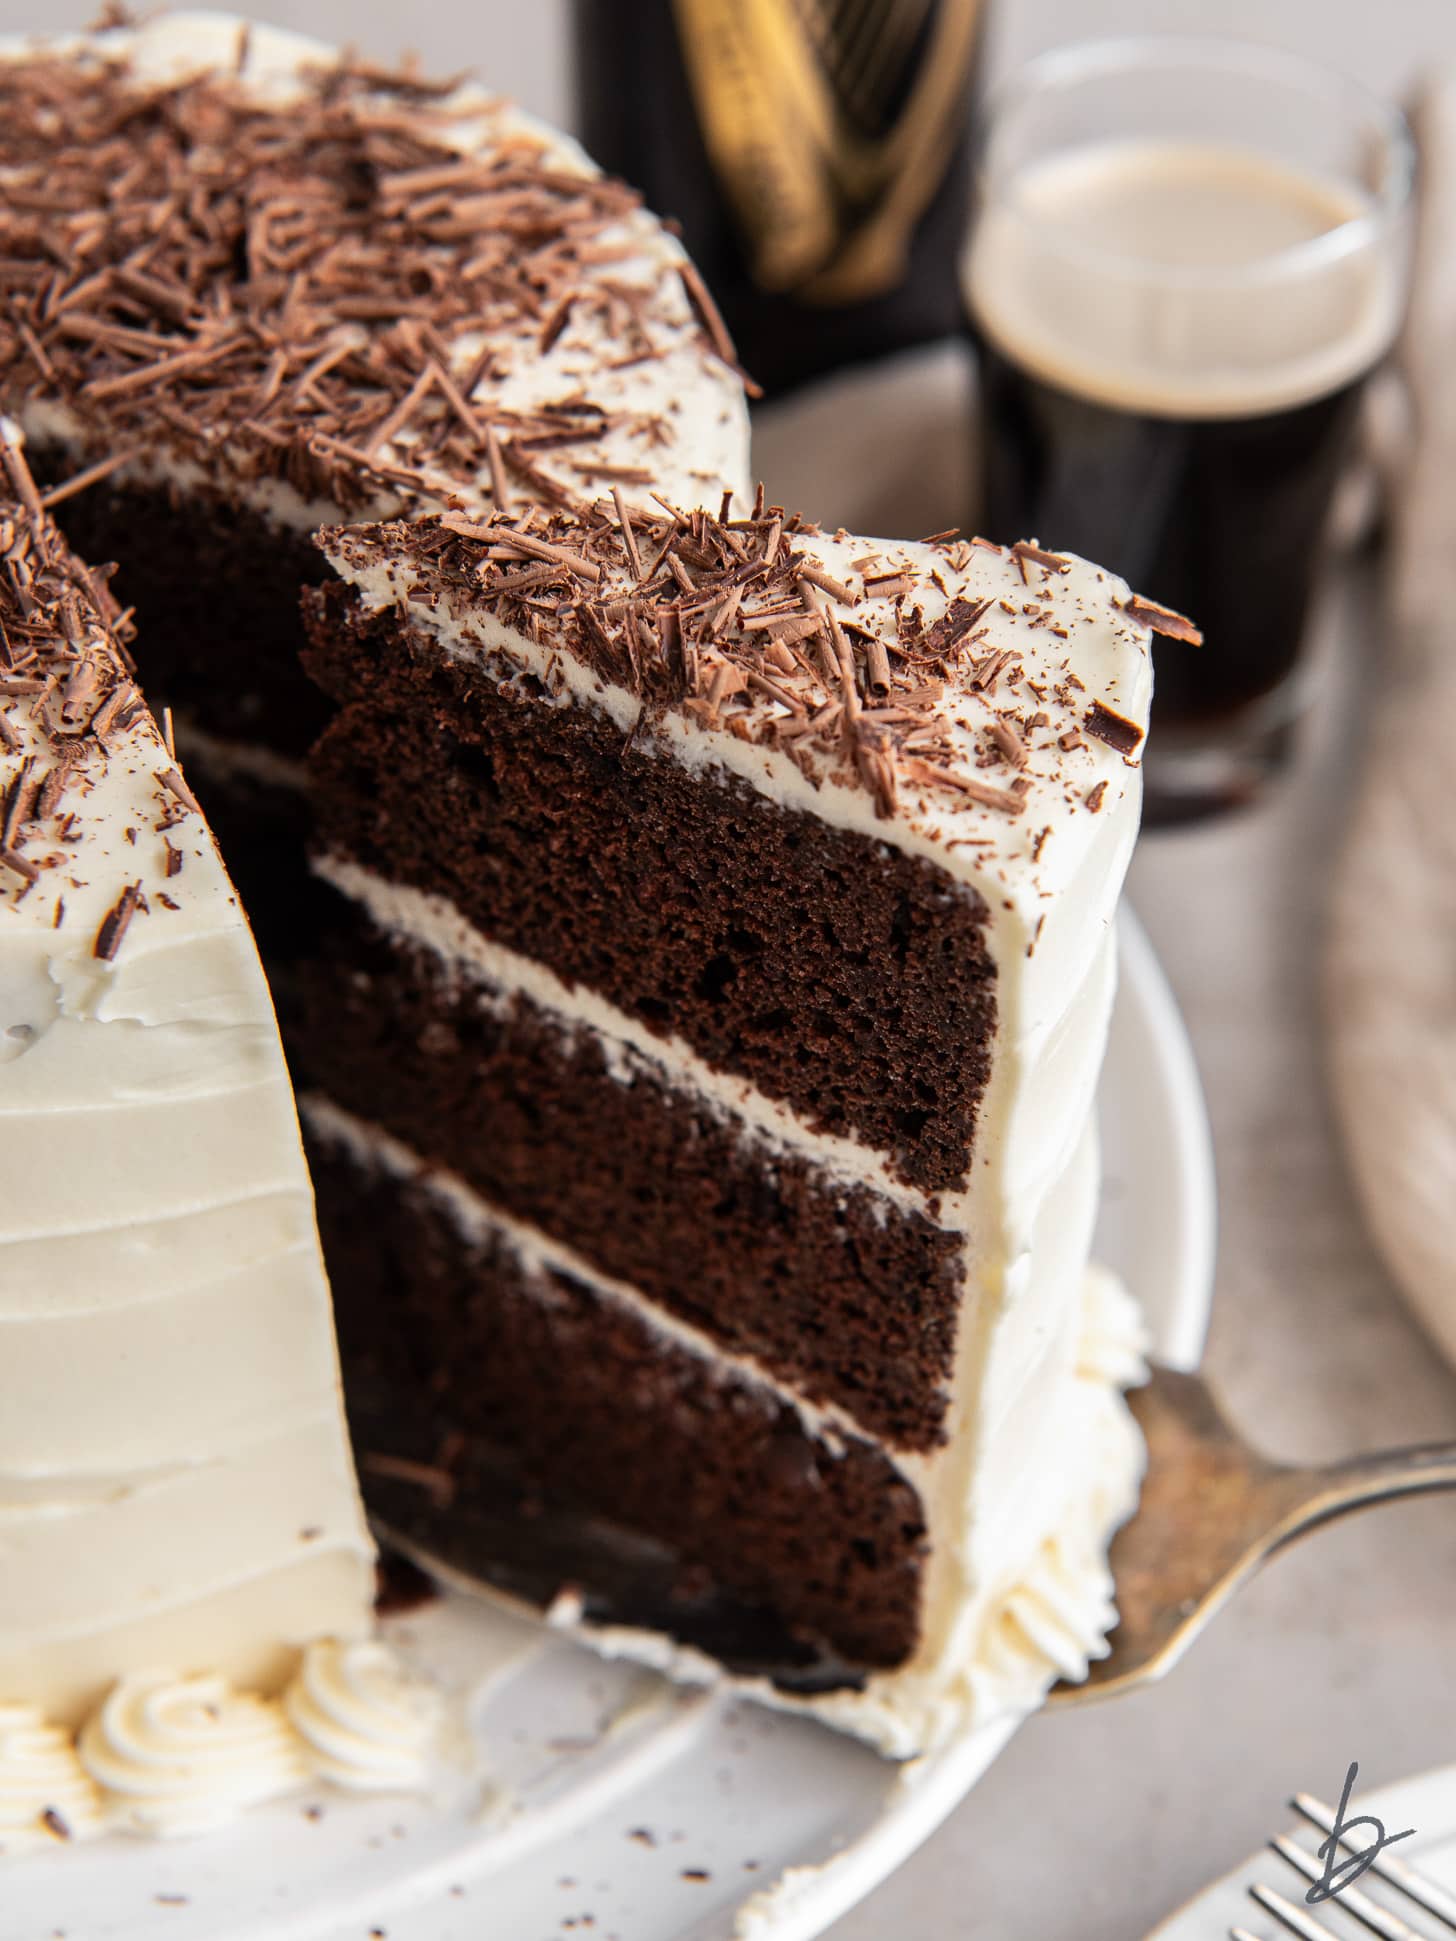 three layer chocolate guinness cake slice being pulled away from cake with baileys frosting and chocolate shavings.